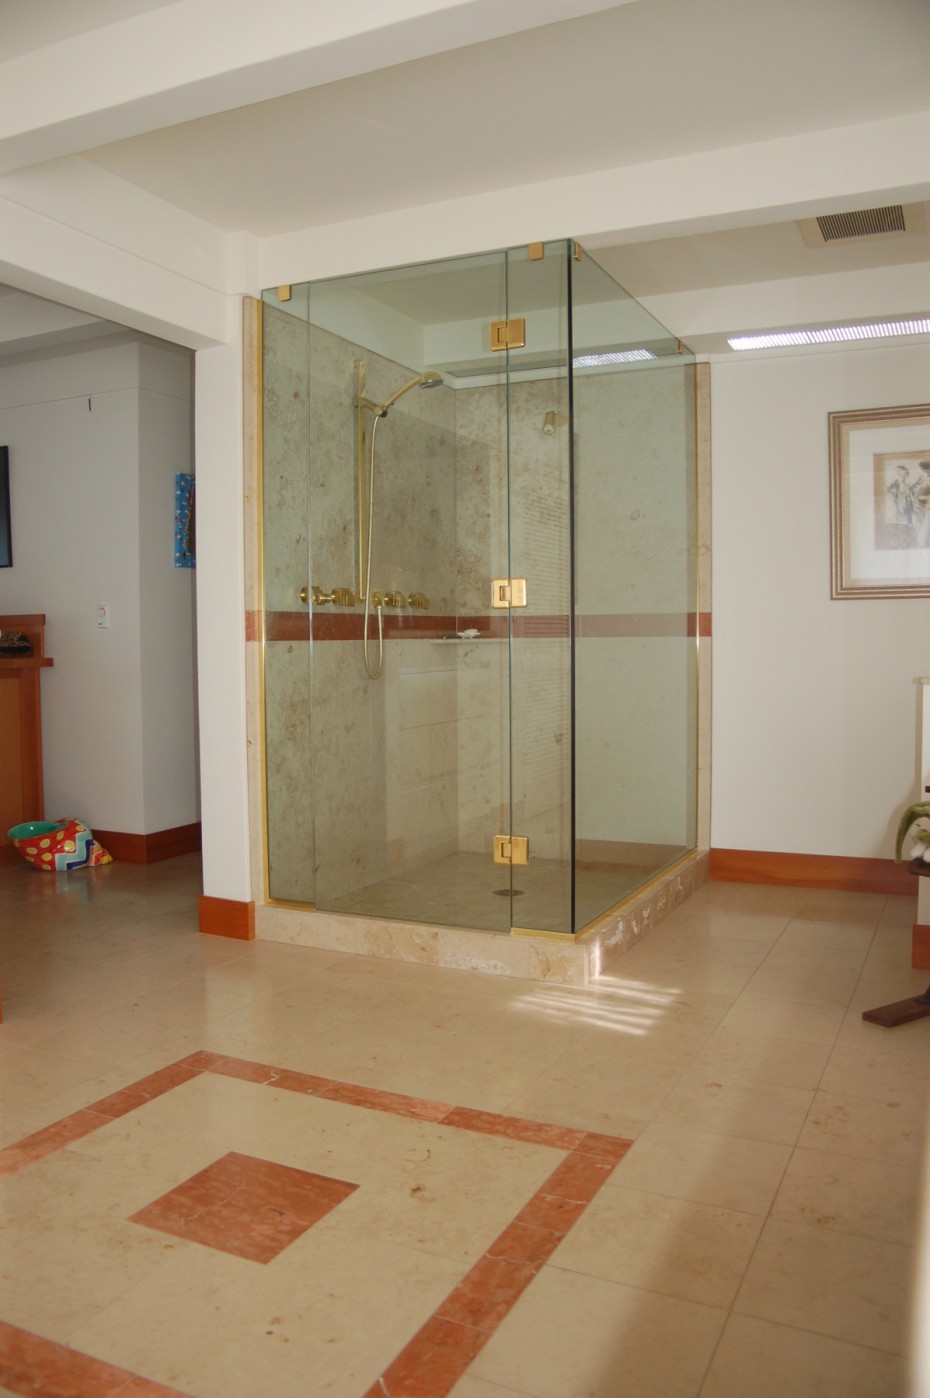 Glorious Frameless Shower Enclosures Clear Glass Entry Door Escorted By Graymarble Wall Tile As Decorate Small Stas Well As Up Shower As Well As Large Open Plan Apartment Bathroom Schemes Bathroom